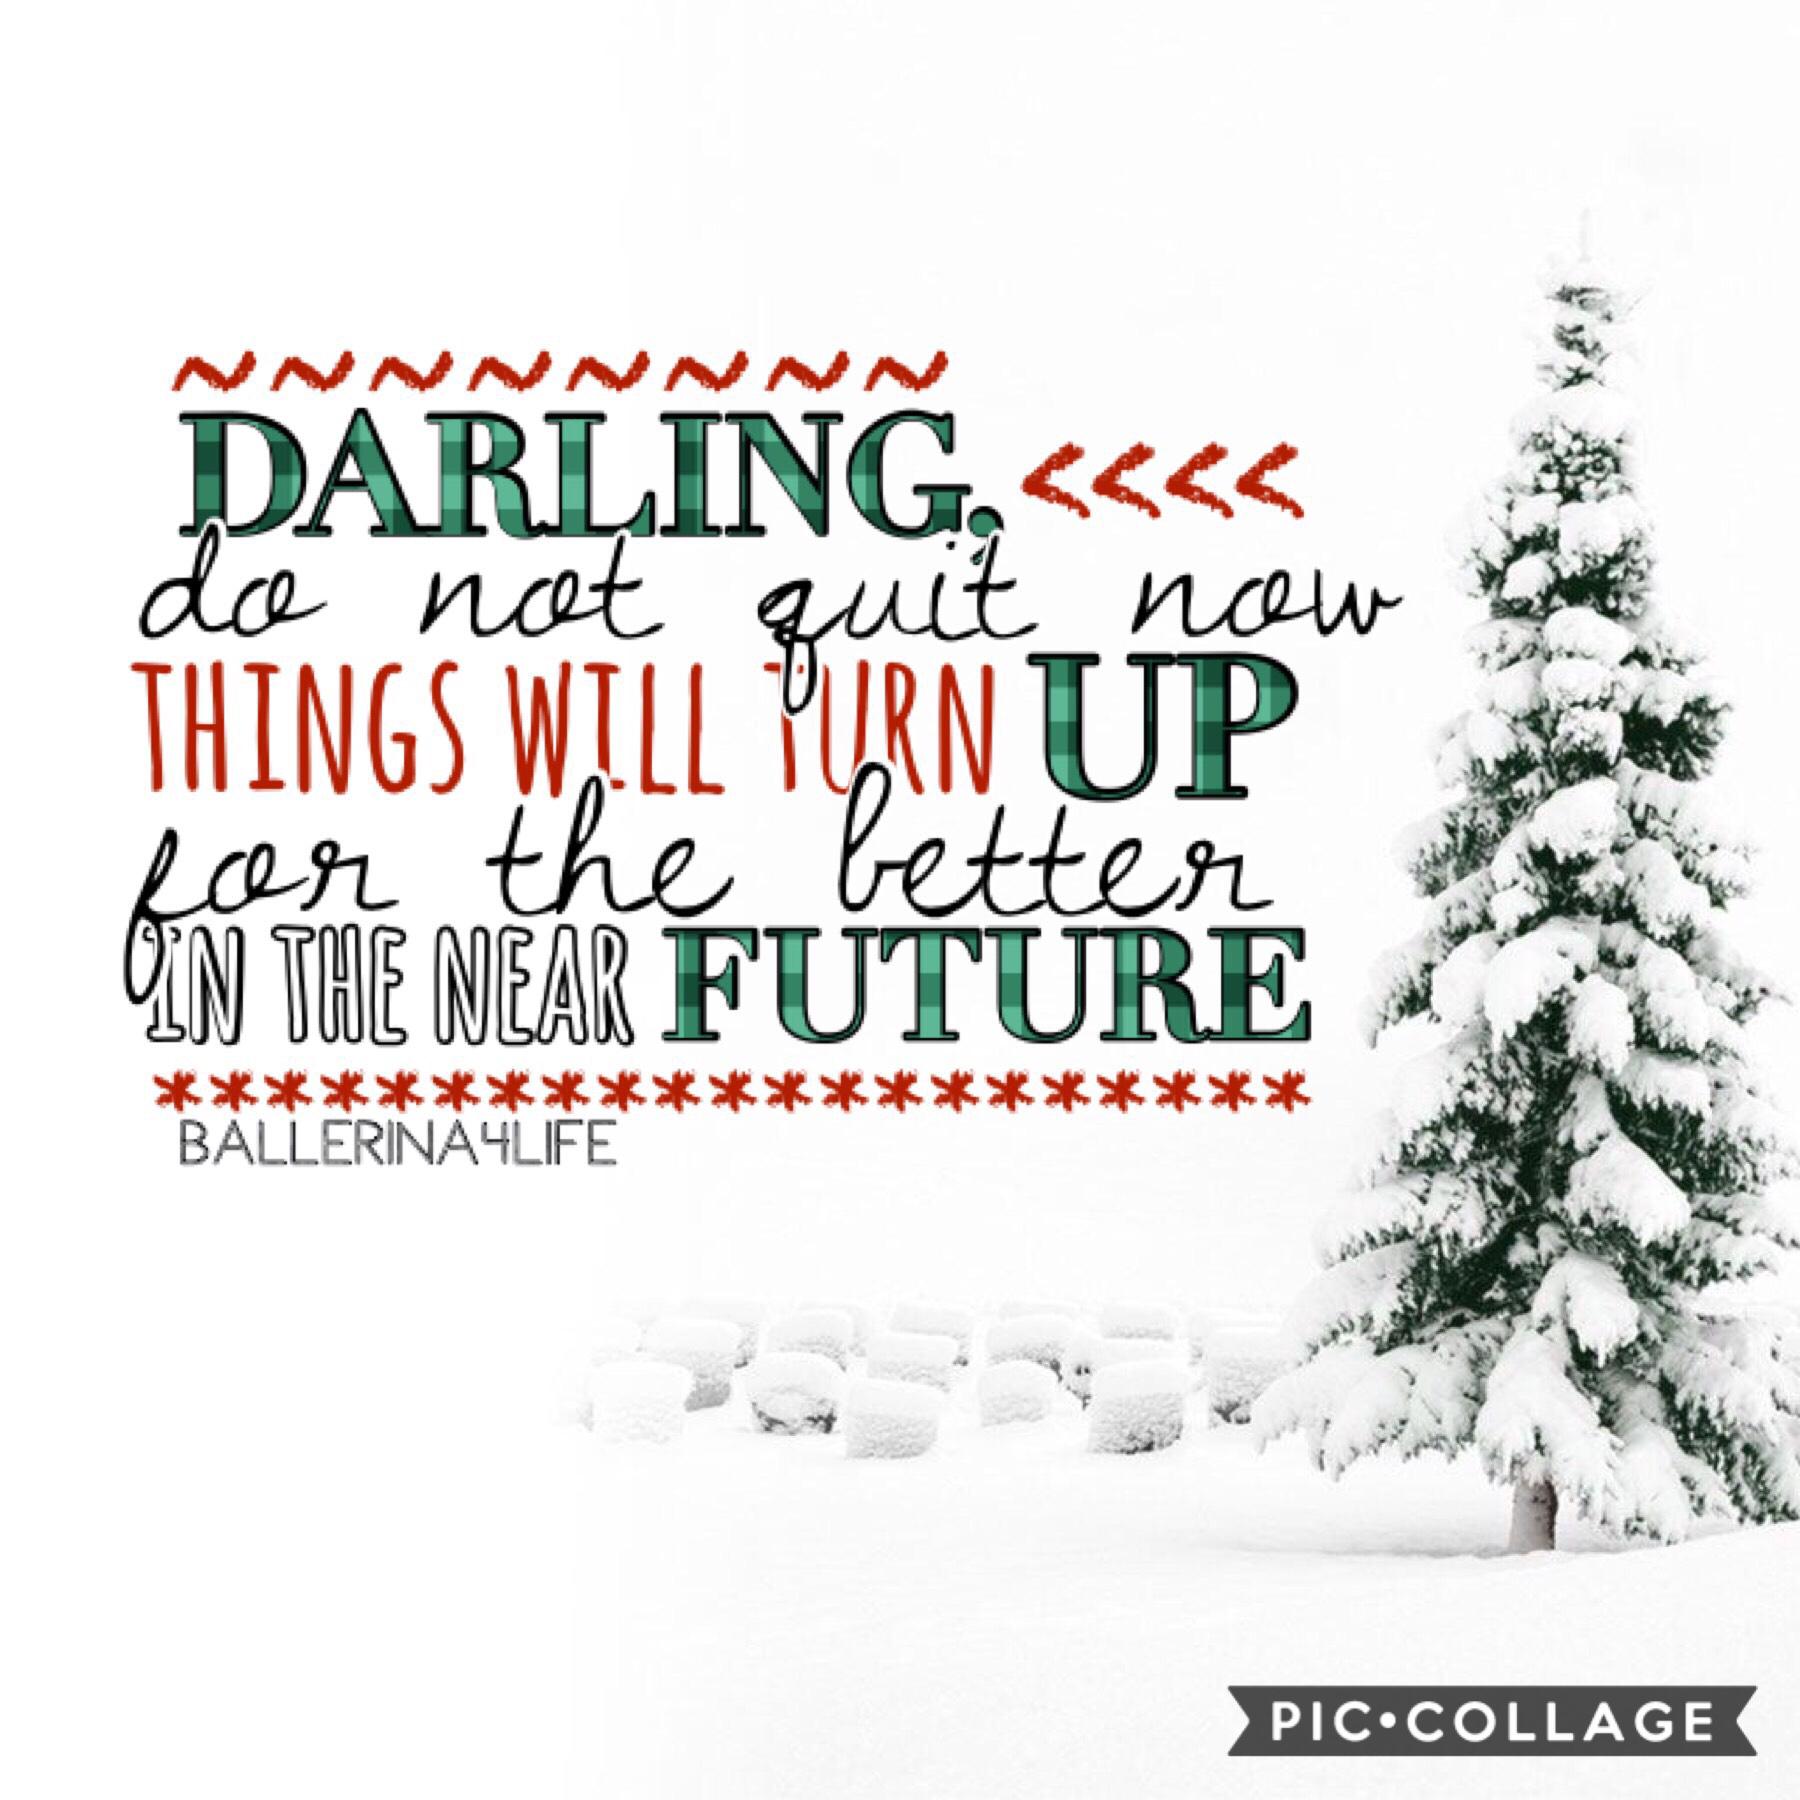 {12/1/18} Day 1 of countdown to Christmas! Sorry for being inactive lately, Ik that can be a bit annoying but I’m here now and that’s all that matters! :)💕 only 31 days till 2019!😱
QOTD: do u have a real or artificial Christmas tree?🌲 